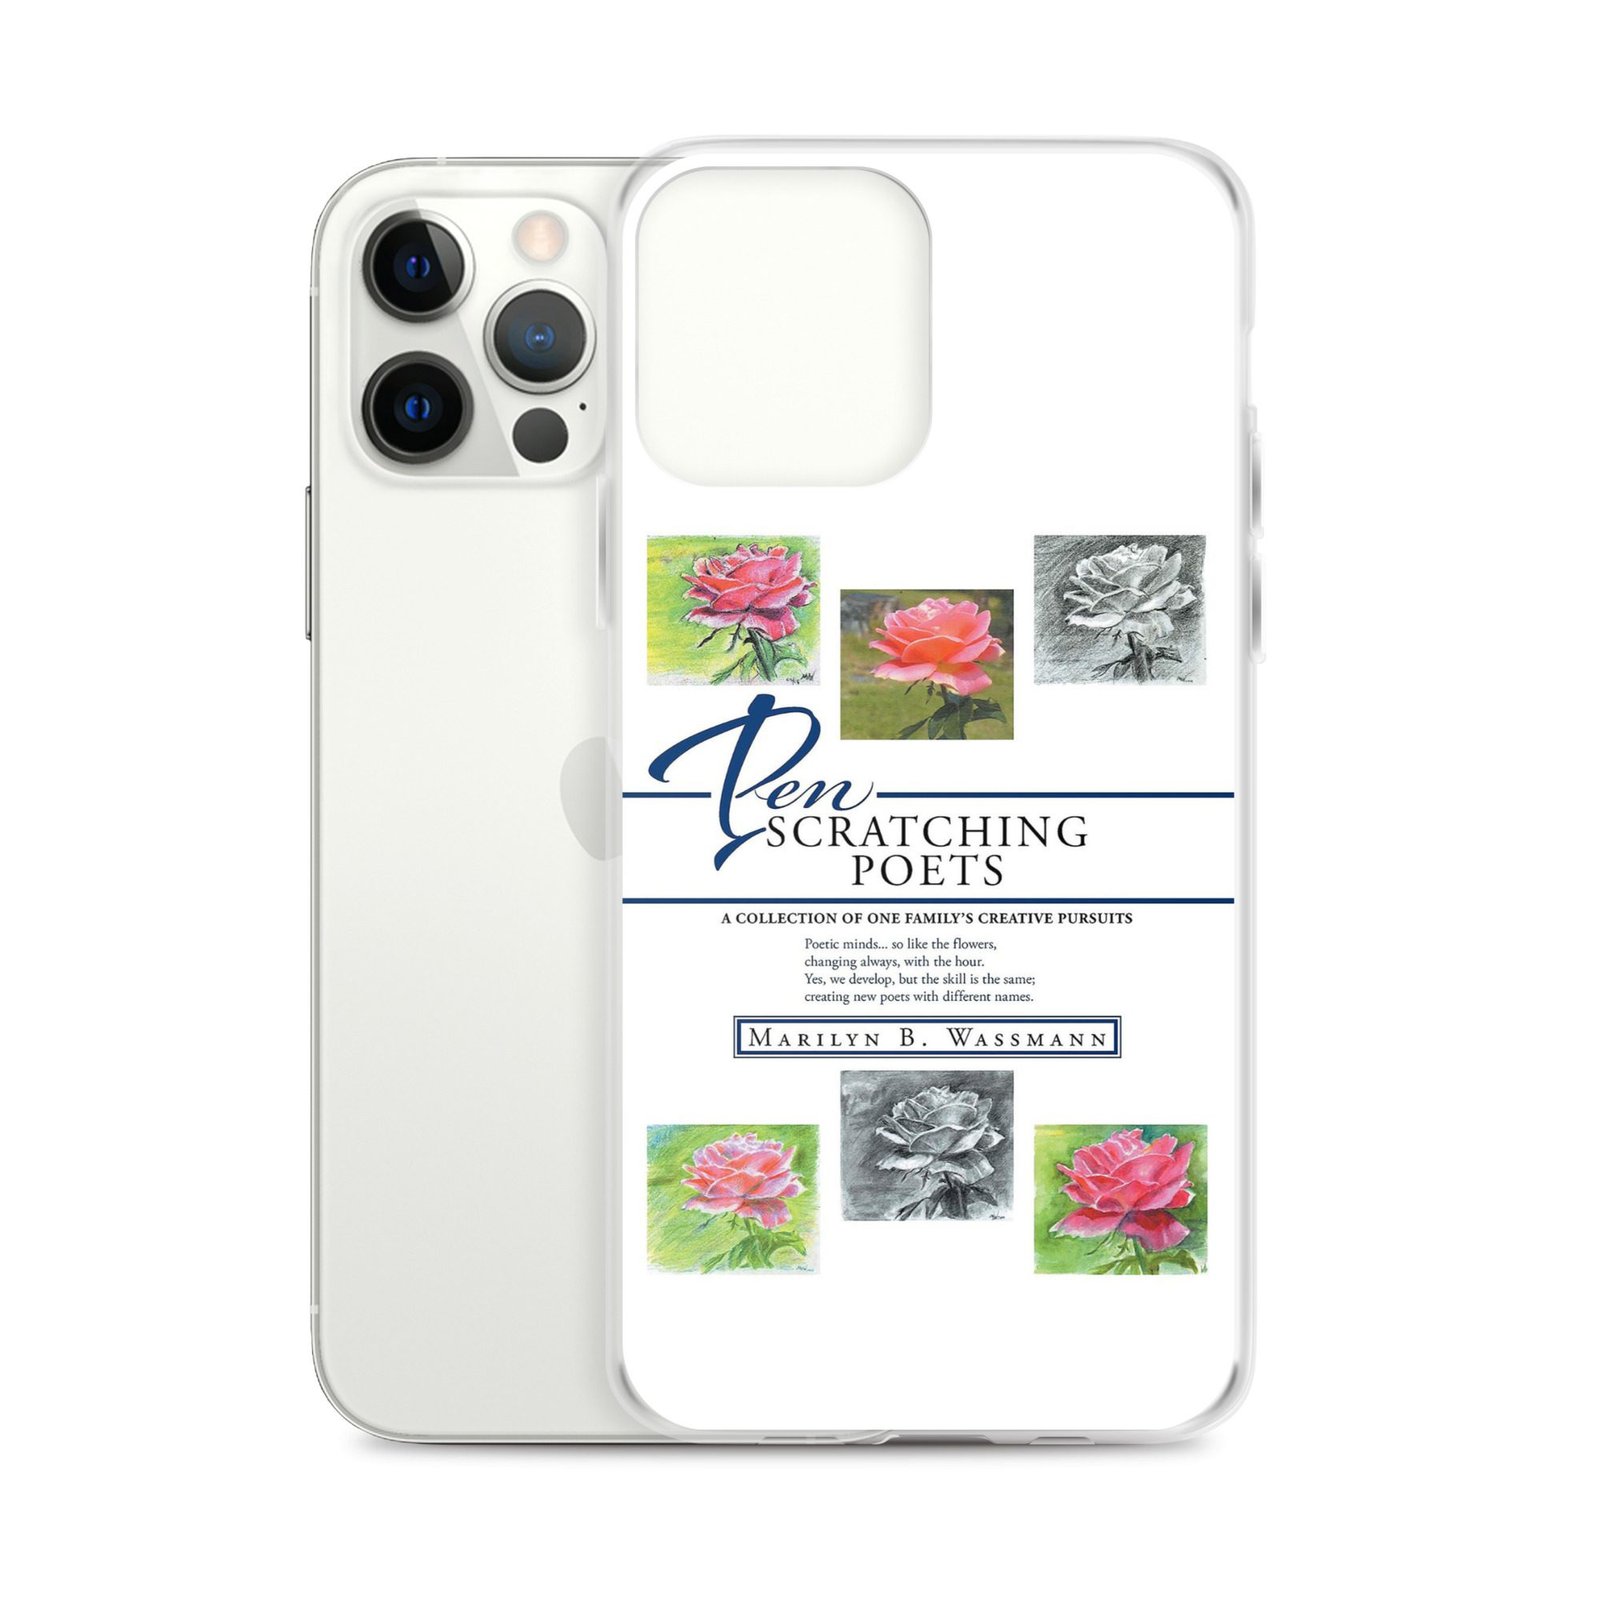 iphone case iphone 12 pro max case with phone 62c59c511080a